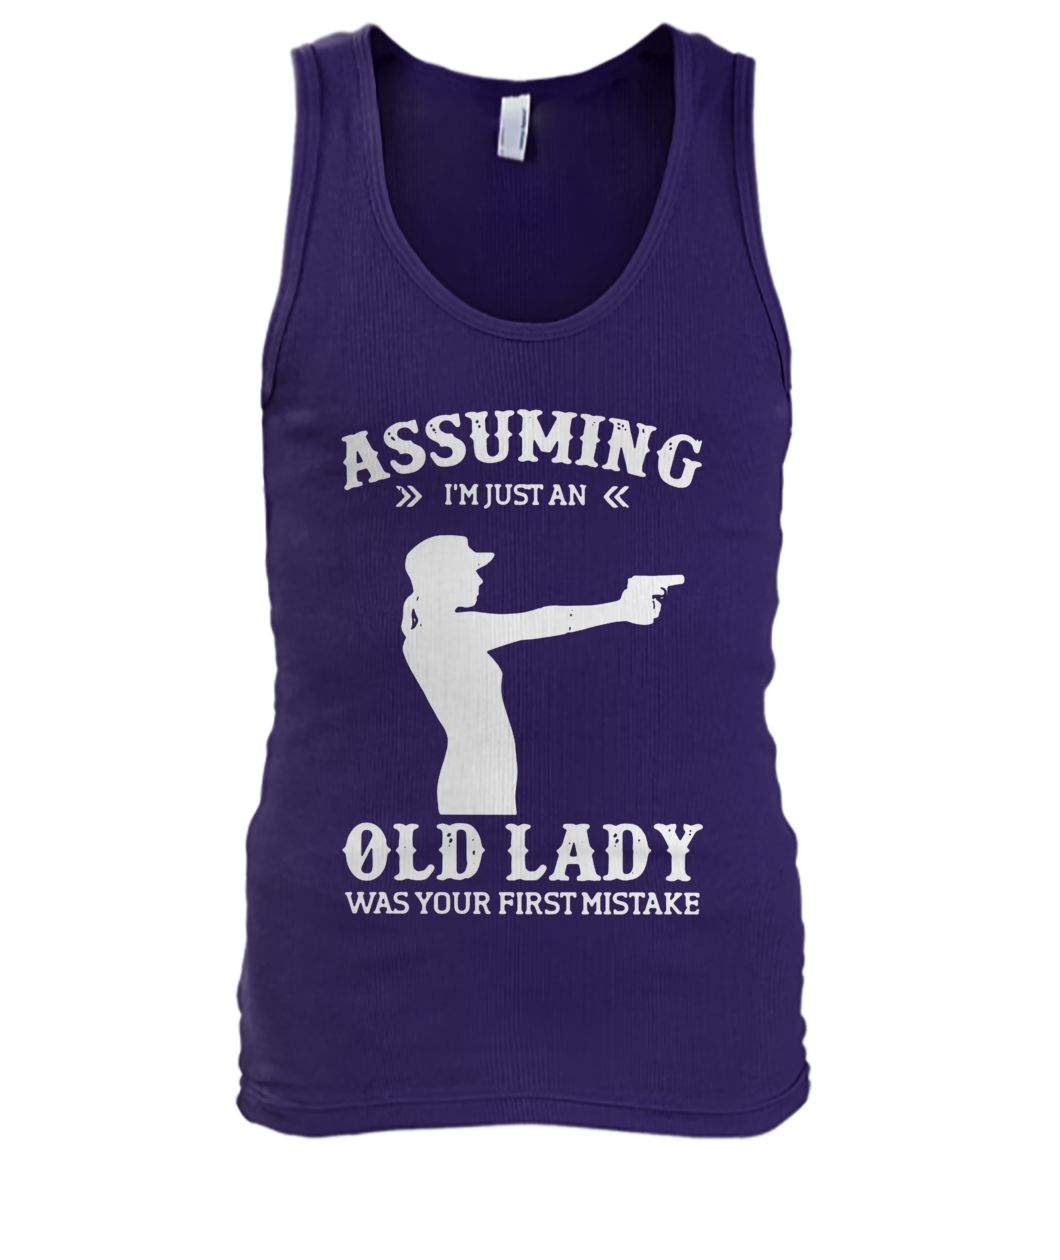 Gun girl assuming I'm just an old lady was your first mistake men's tank top